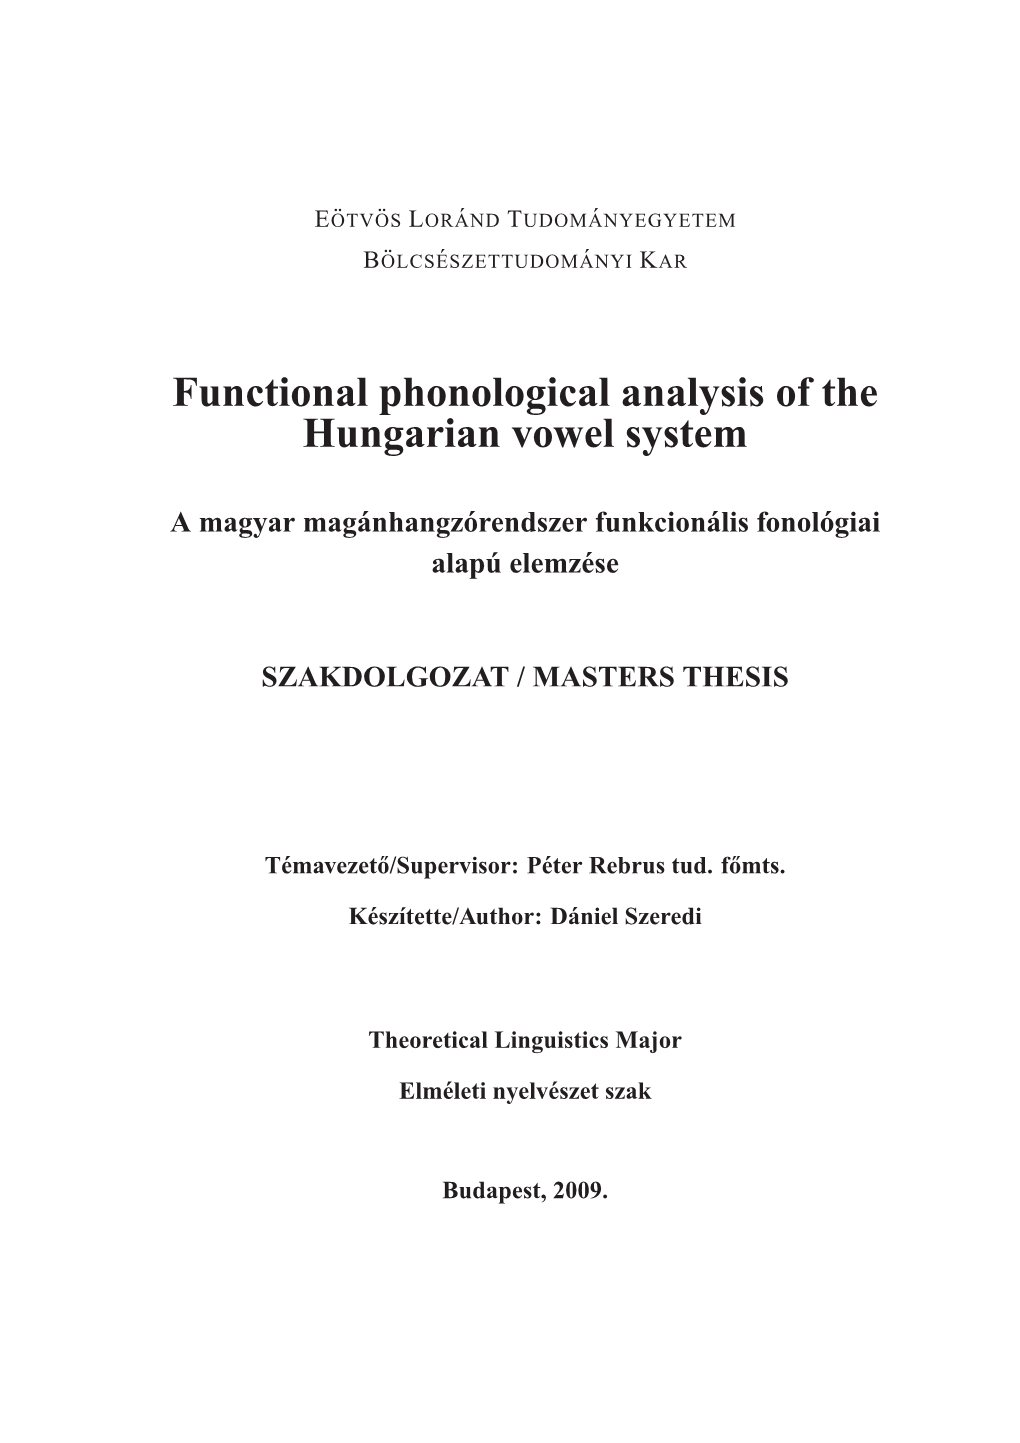 Functional Phonological Analysis of the Hungarian Vowel System